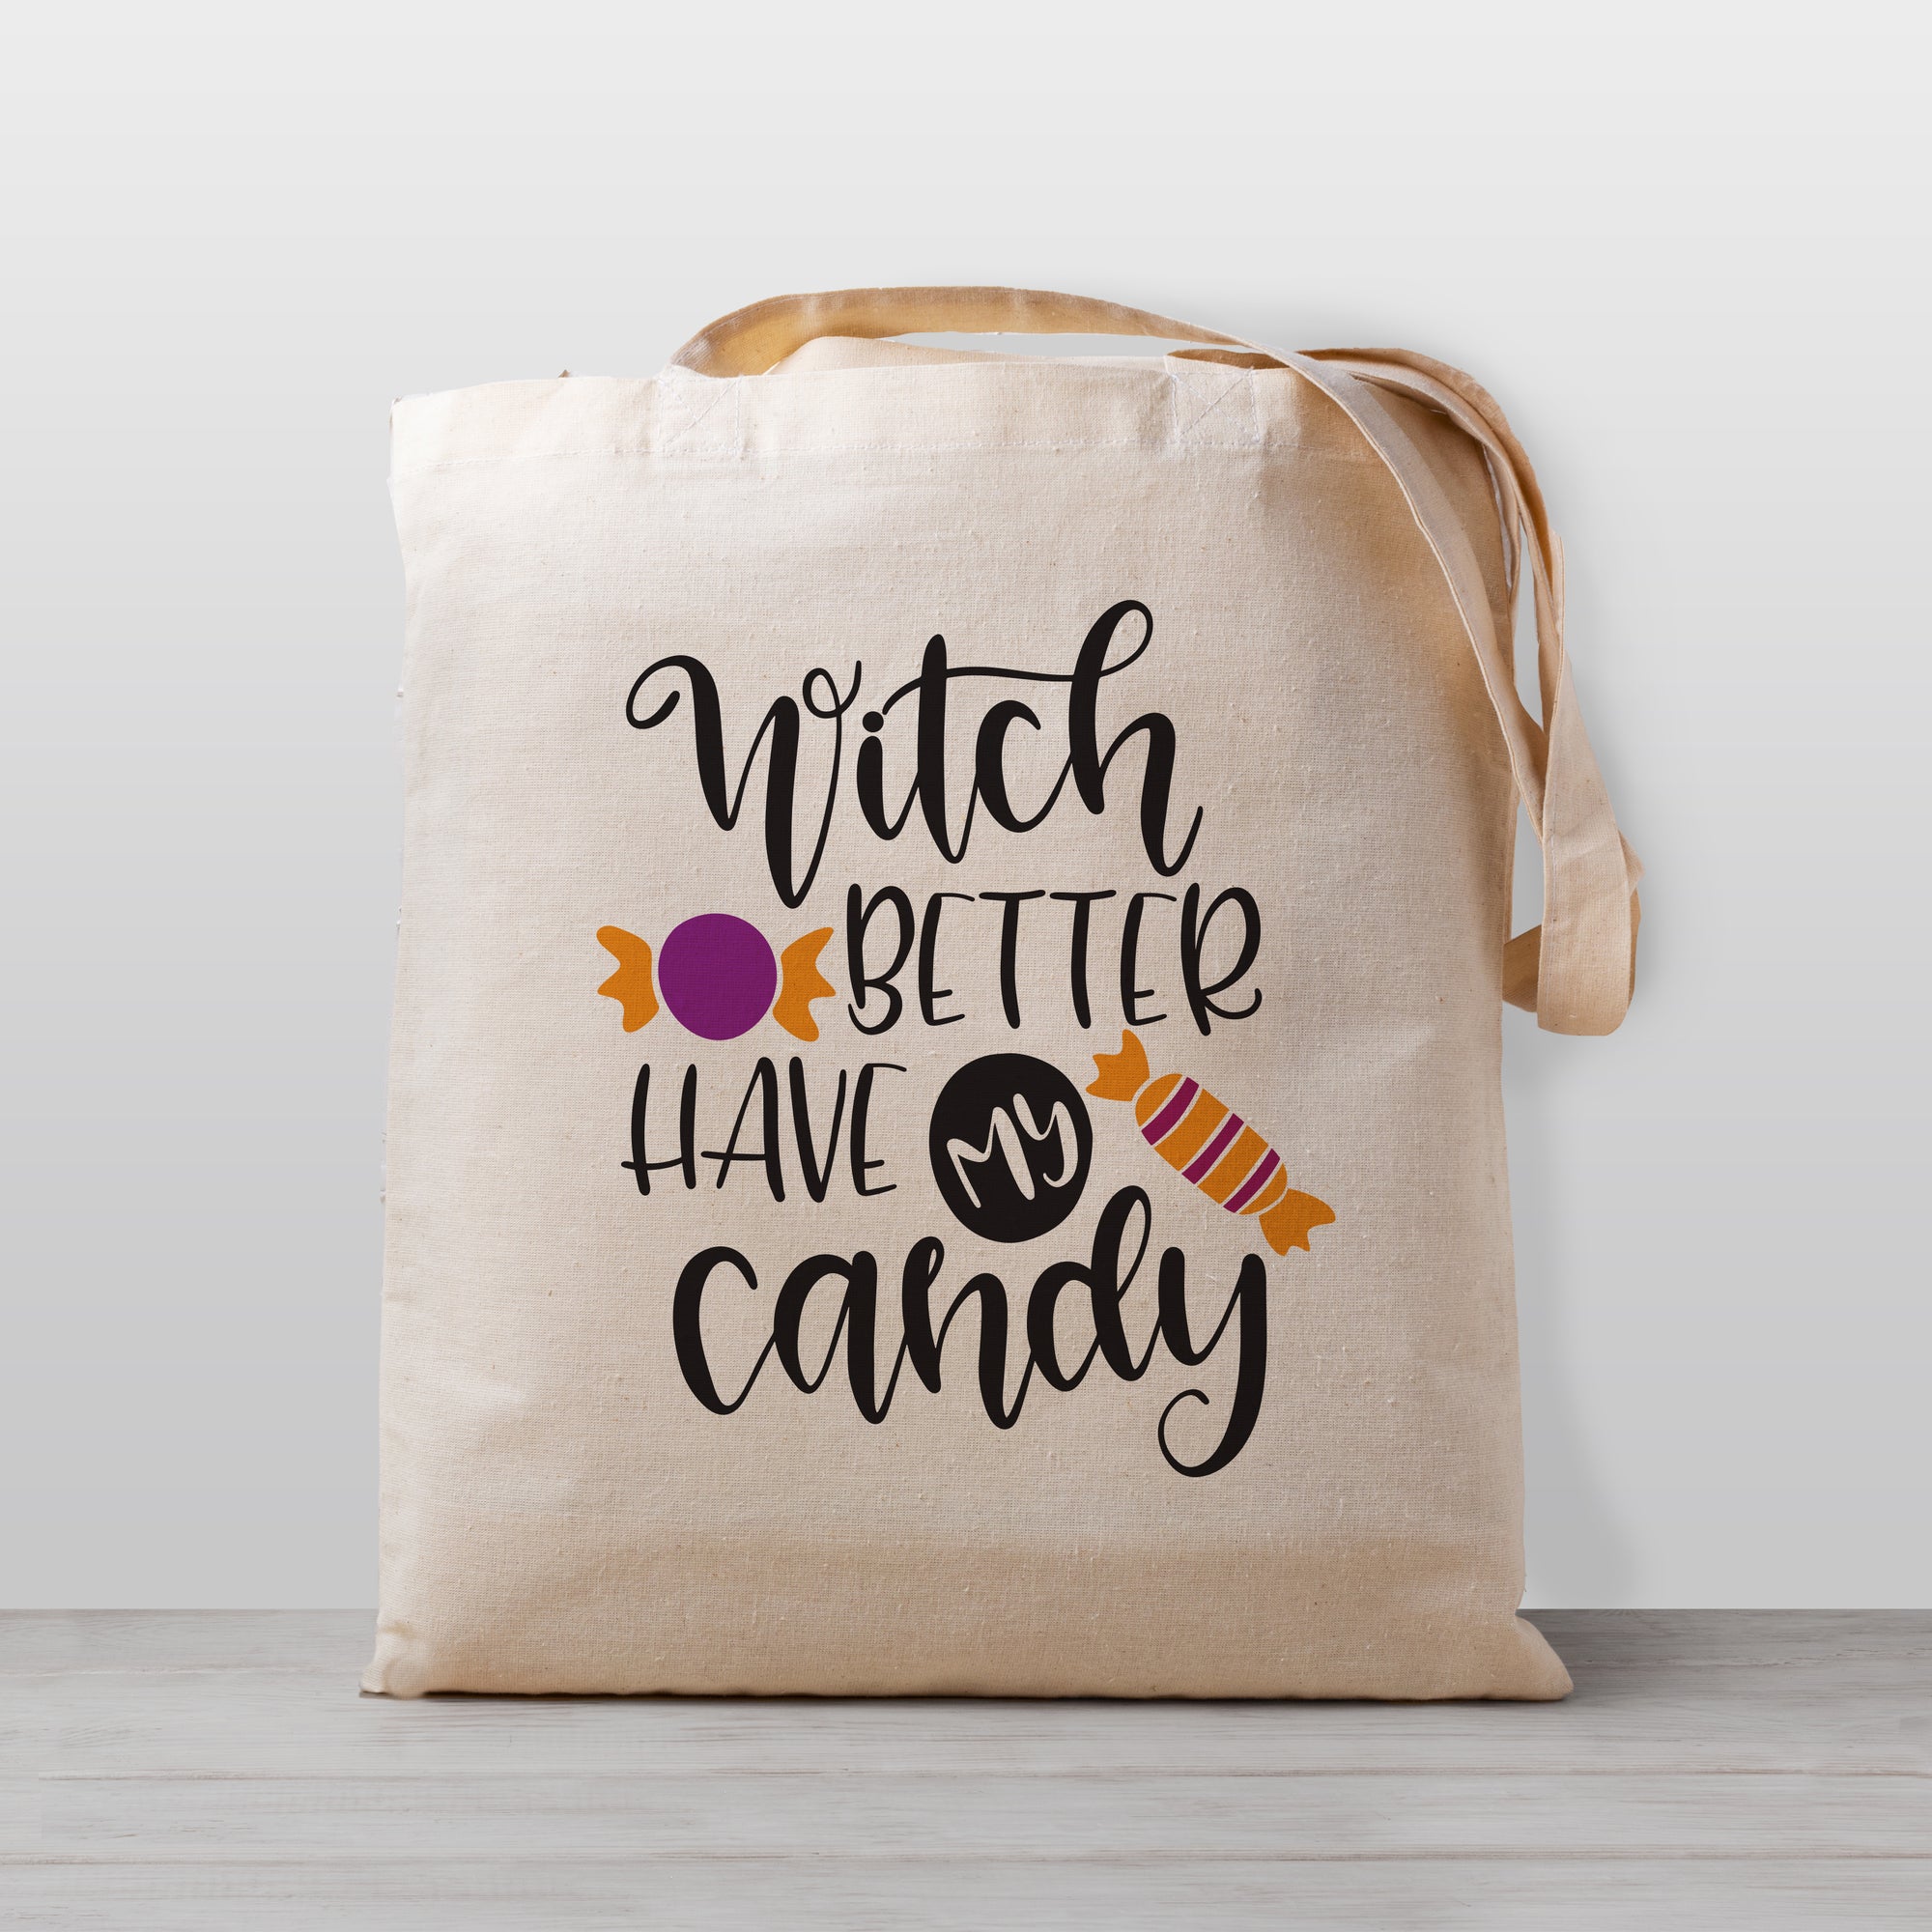 Halloween Trick or Treat Tote Bag "Witch Better Have My Candy", 100% natural cotton canvas